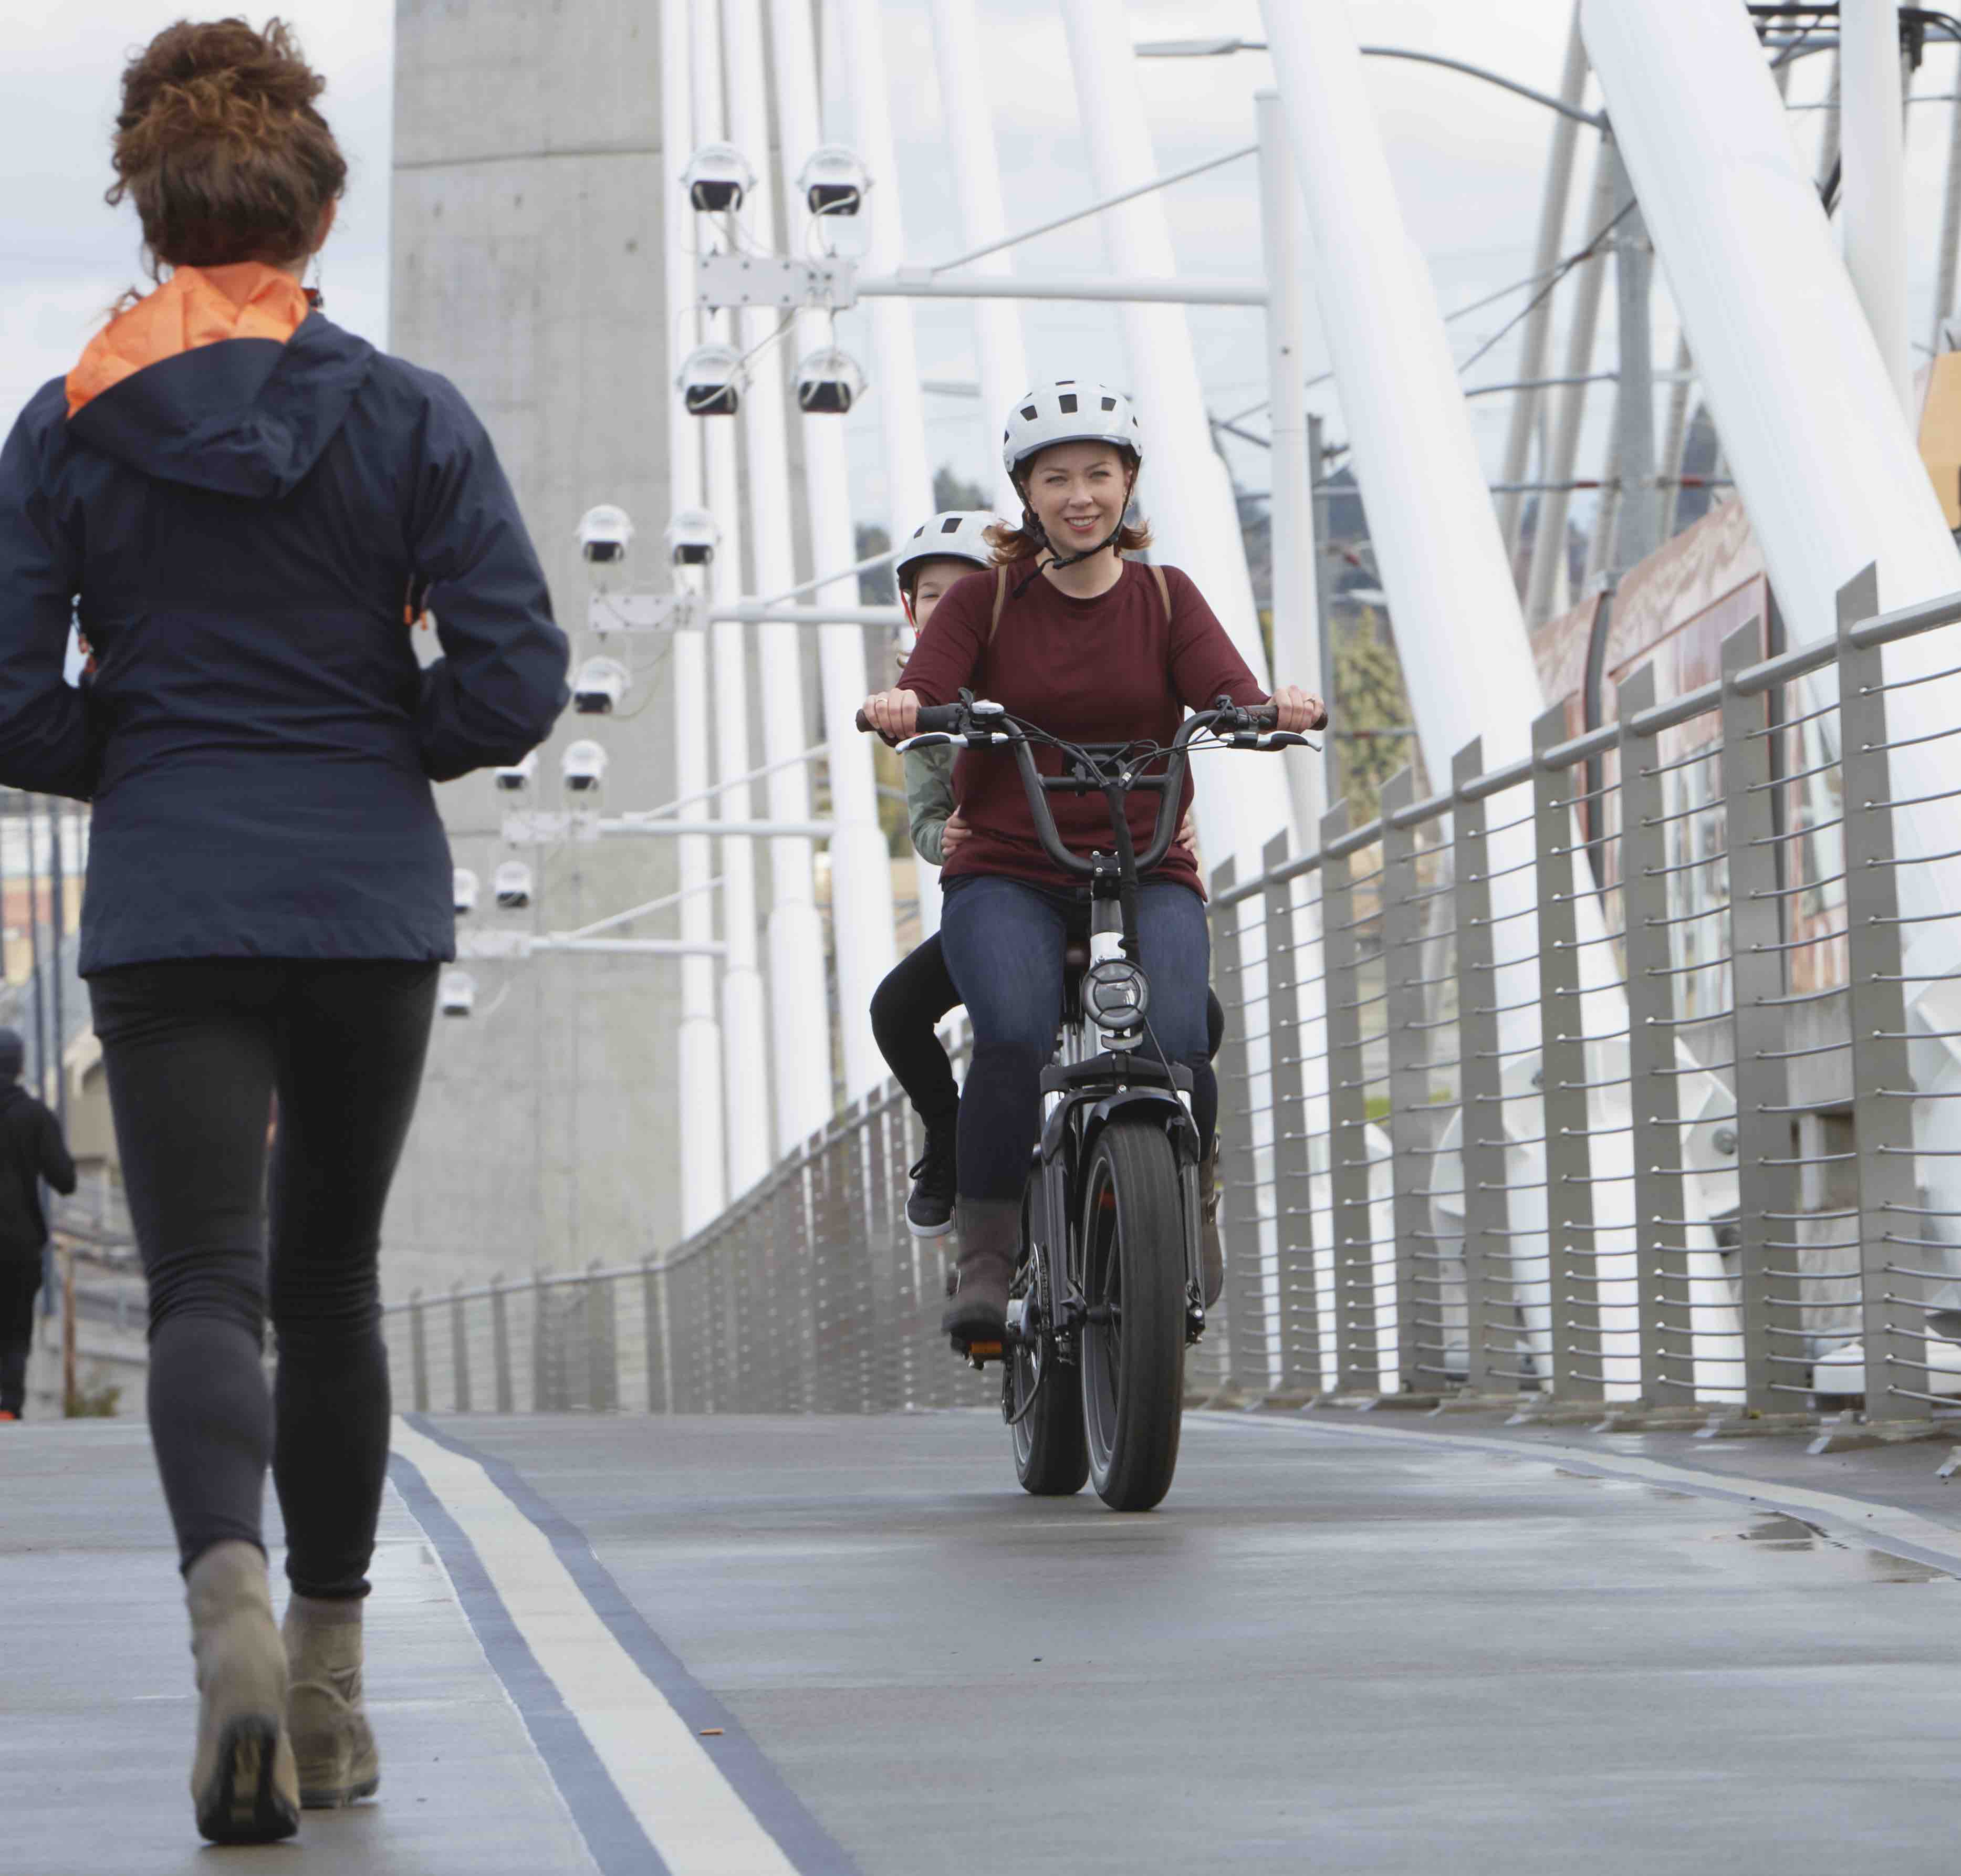 A woman and her child ride a RadRunner Plus utility ebike over a bridge on a foggy day.